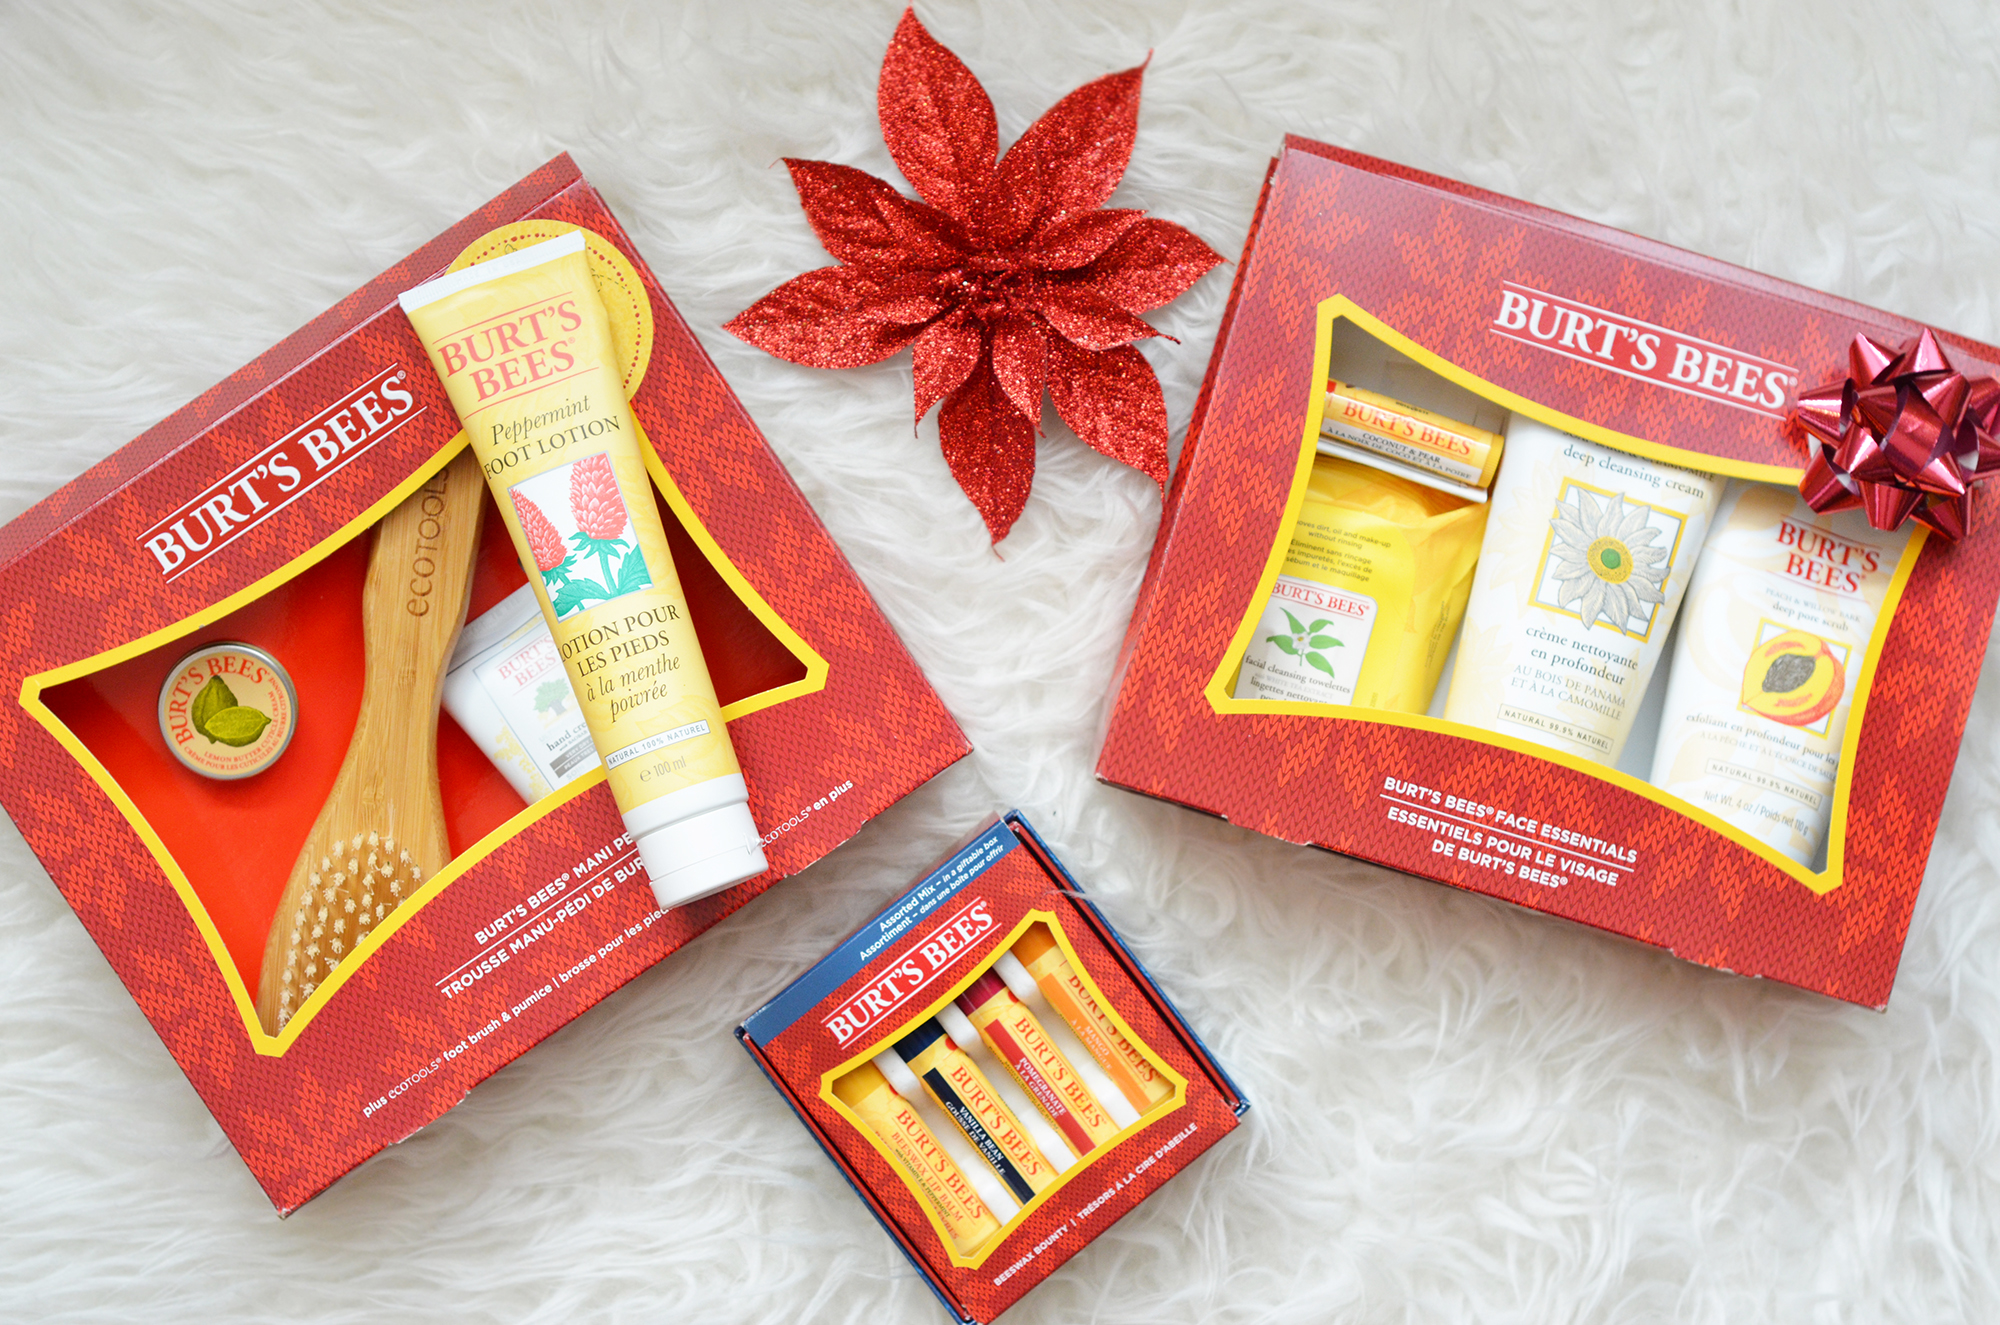 Burts Bees, Gift Ideas for teens